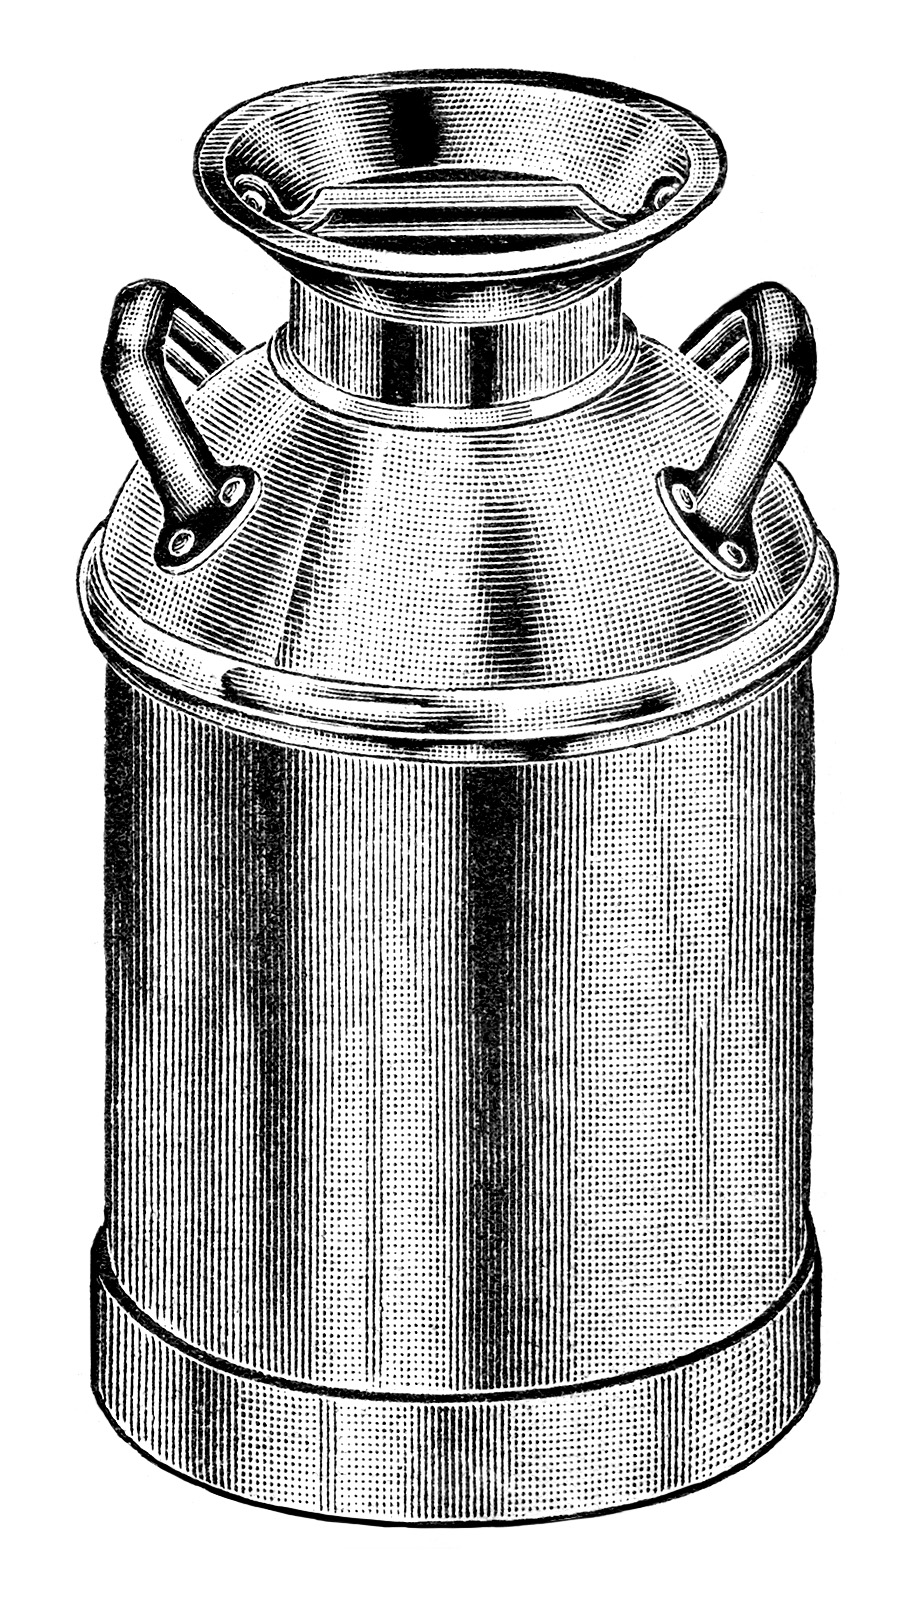 vintage milk can clip art, old fashioned milk container, antique catalogue ad, black and white clipart, gem pattern milk can image